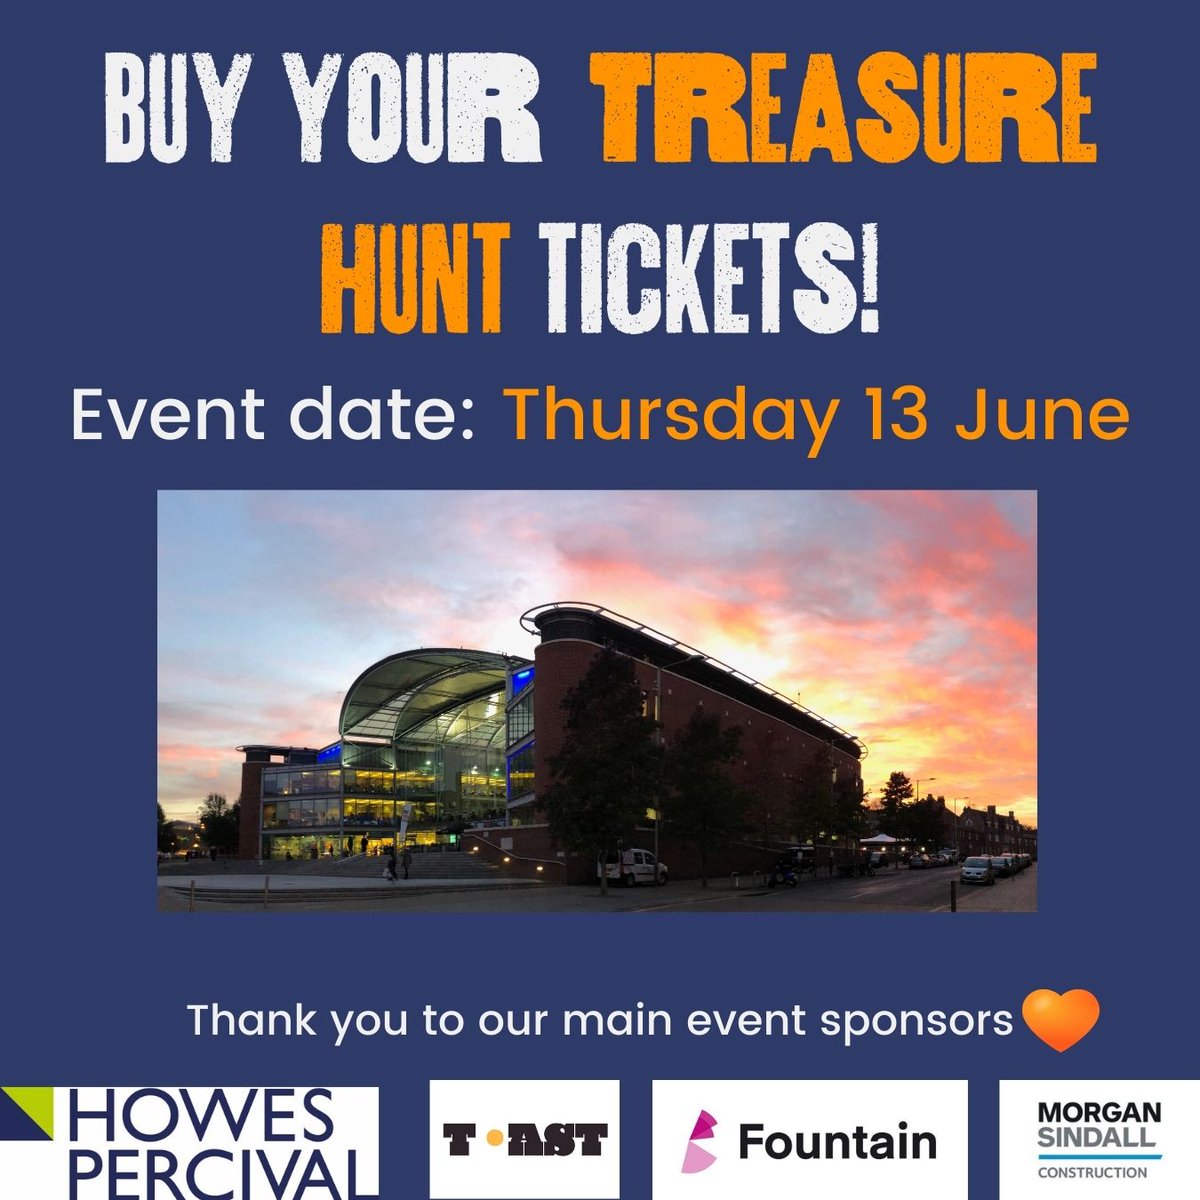 Get your tickets for our Summer Treasure Hunt! 🔸 A fun night out in the city centre solving clues 🔸 Start and end at The Forum 🔸 Our very own catering team will provide a delicious buffet to round things off Full info thefeed.org.uk/about-us/news/…